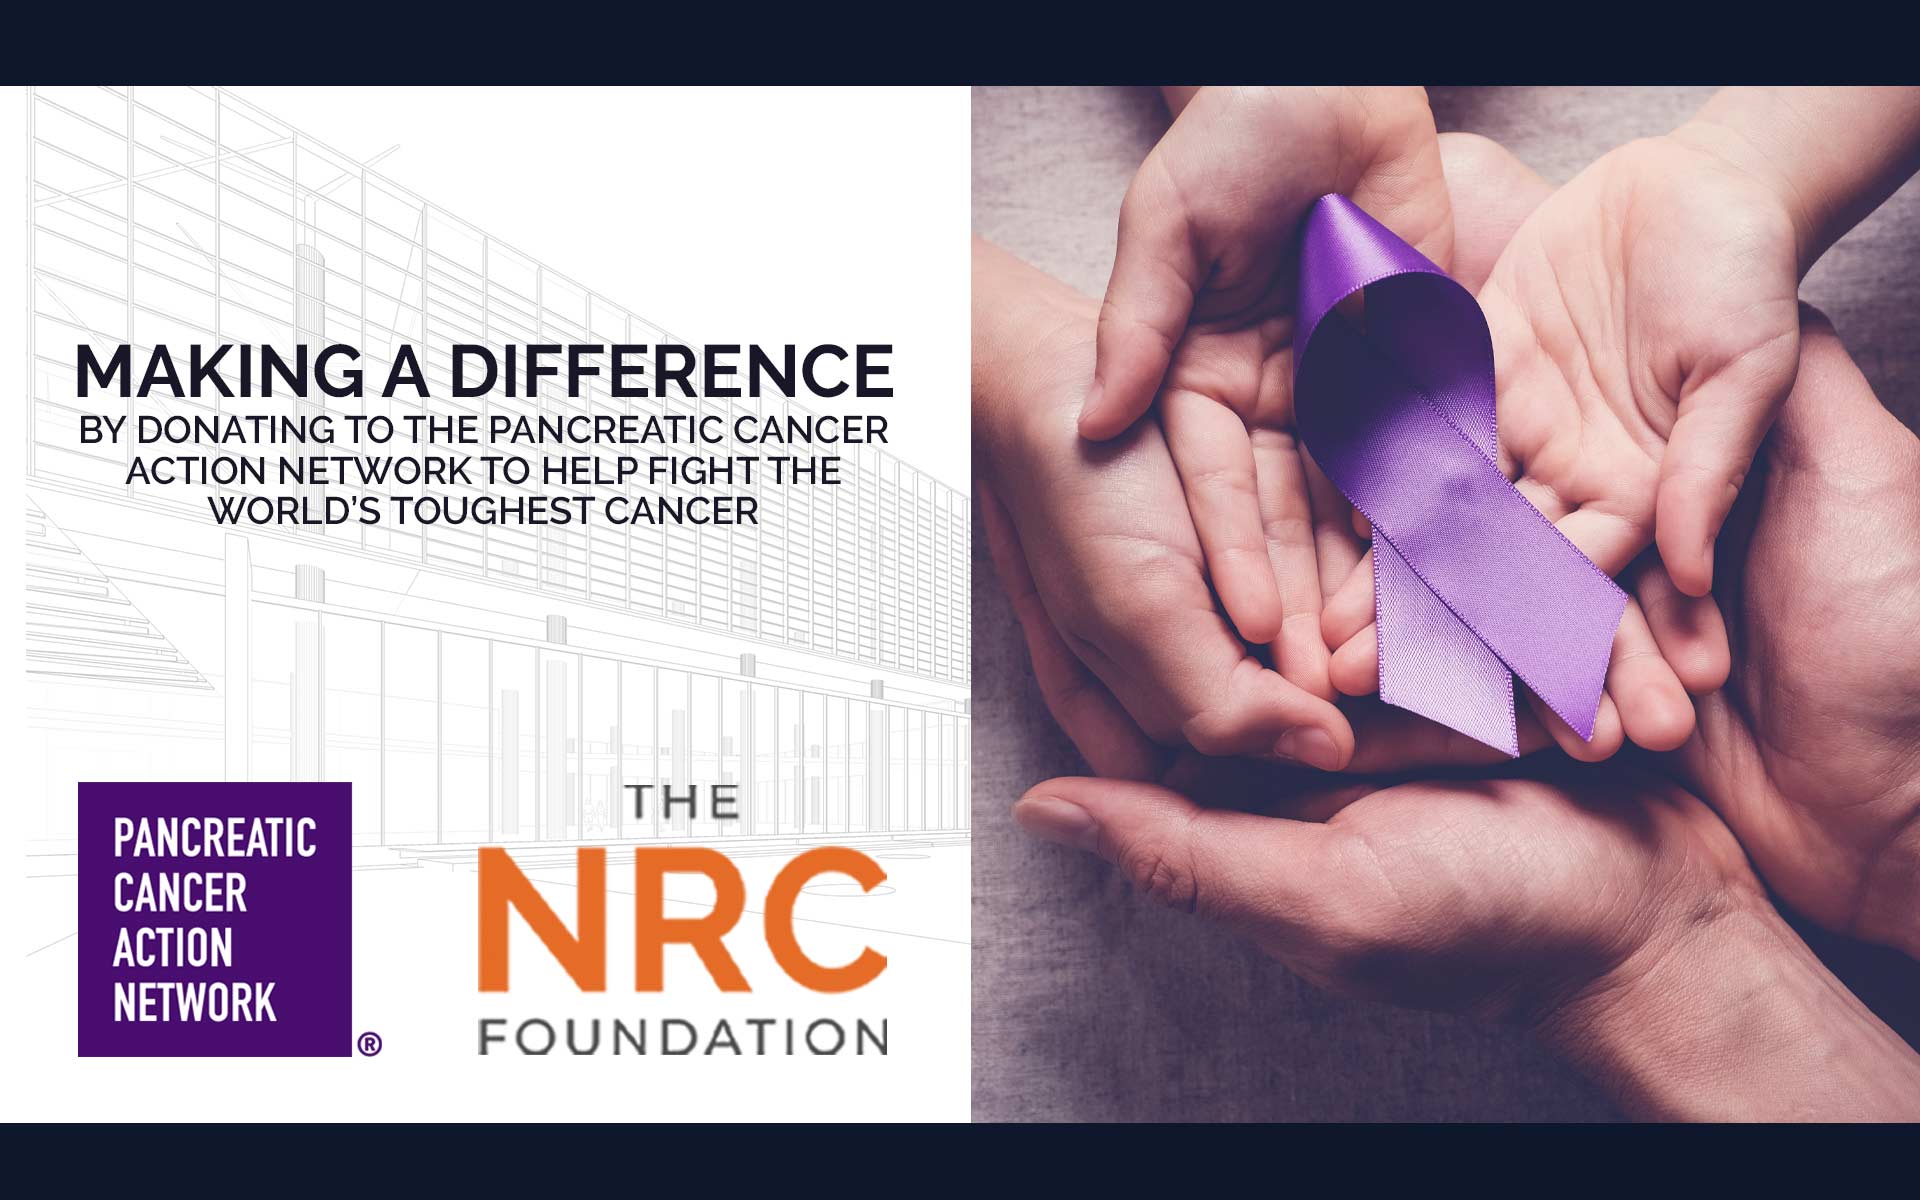 The NRC Foundation Recently Donated to the Pancreatic Cancer Action Network